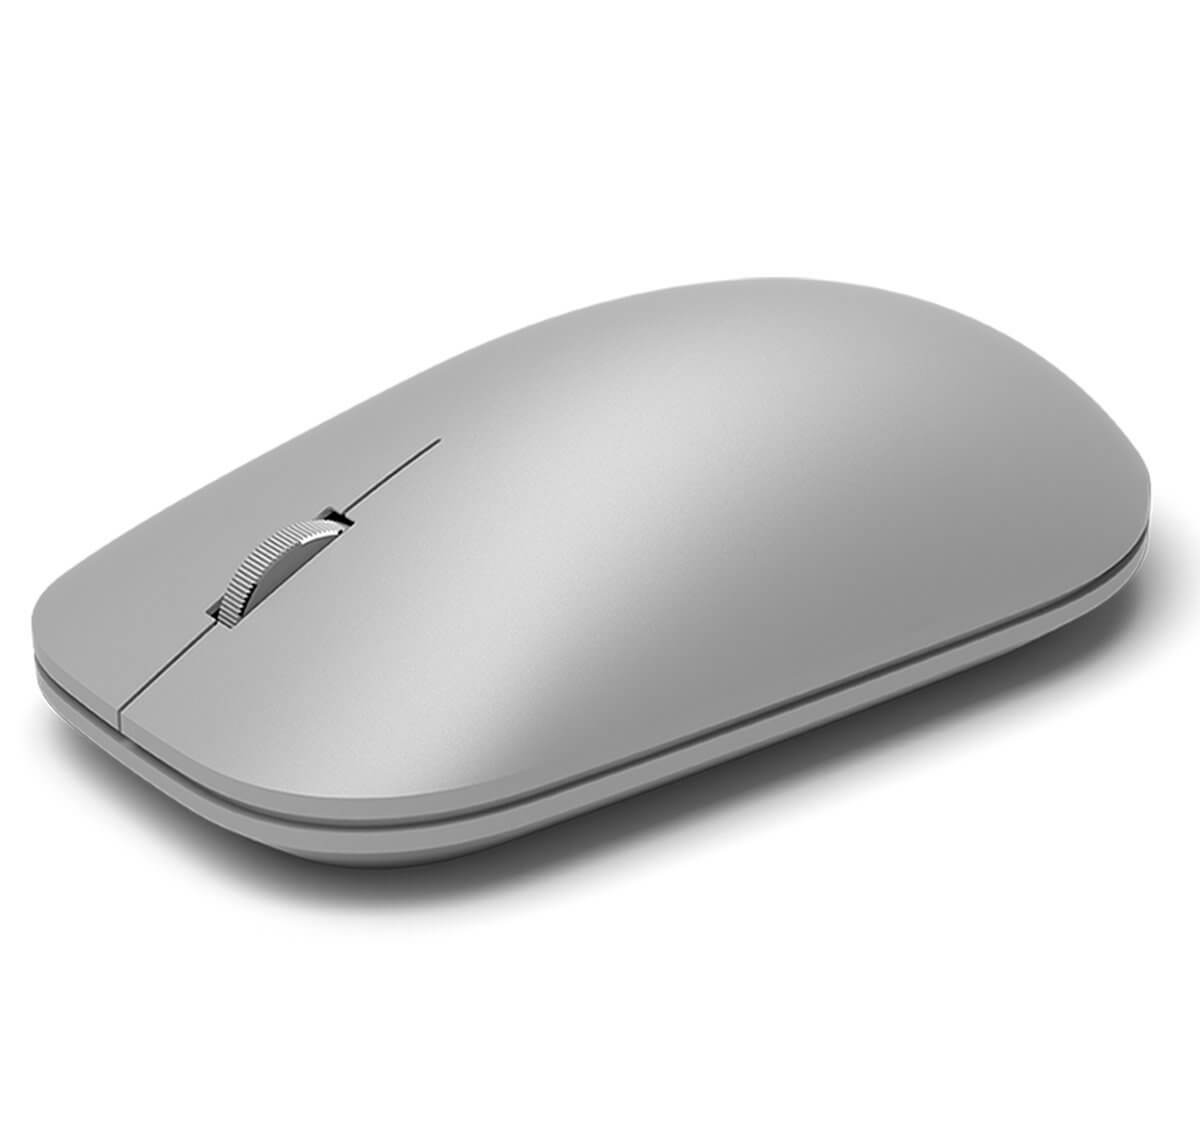 microsoft surface mouse (1)